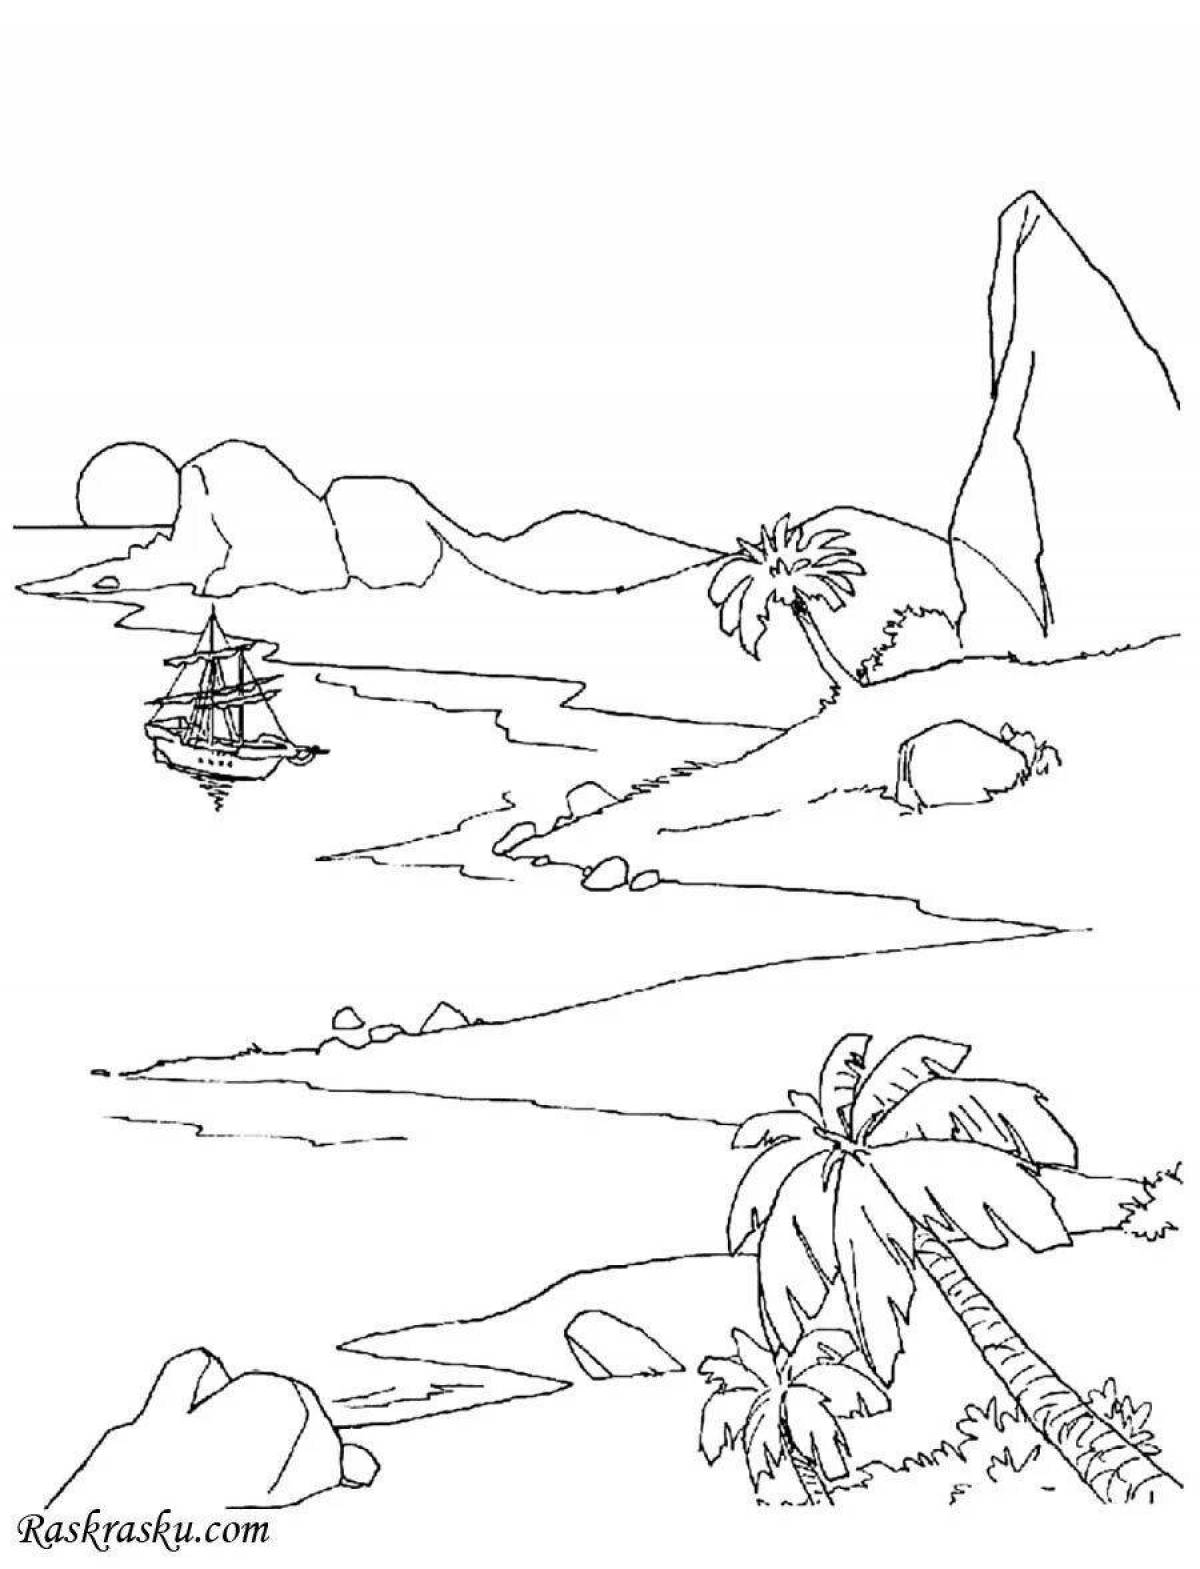 Coloring page picturesque desert island